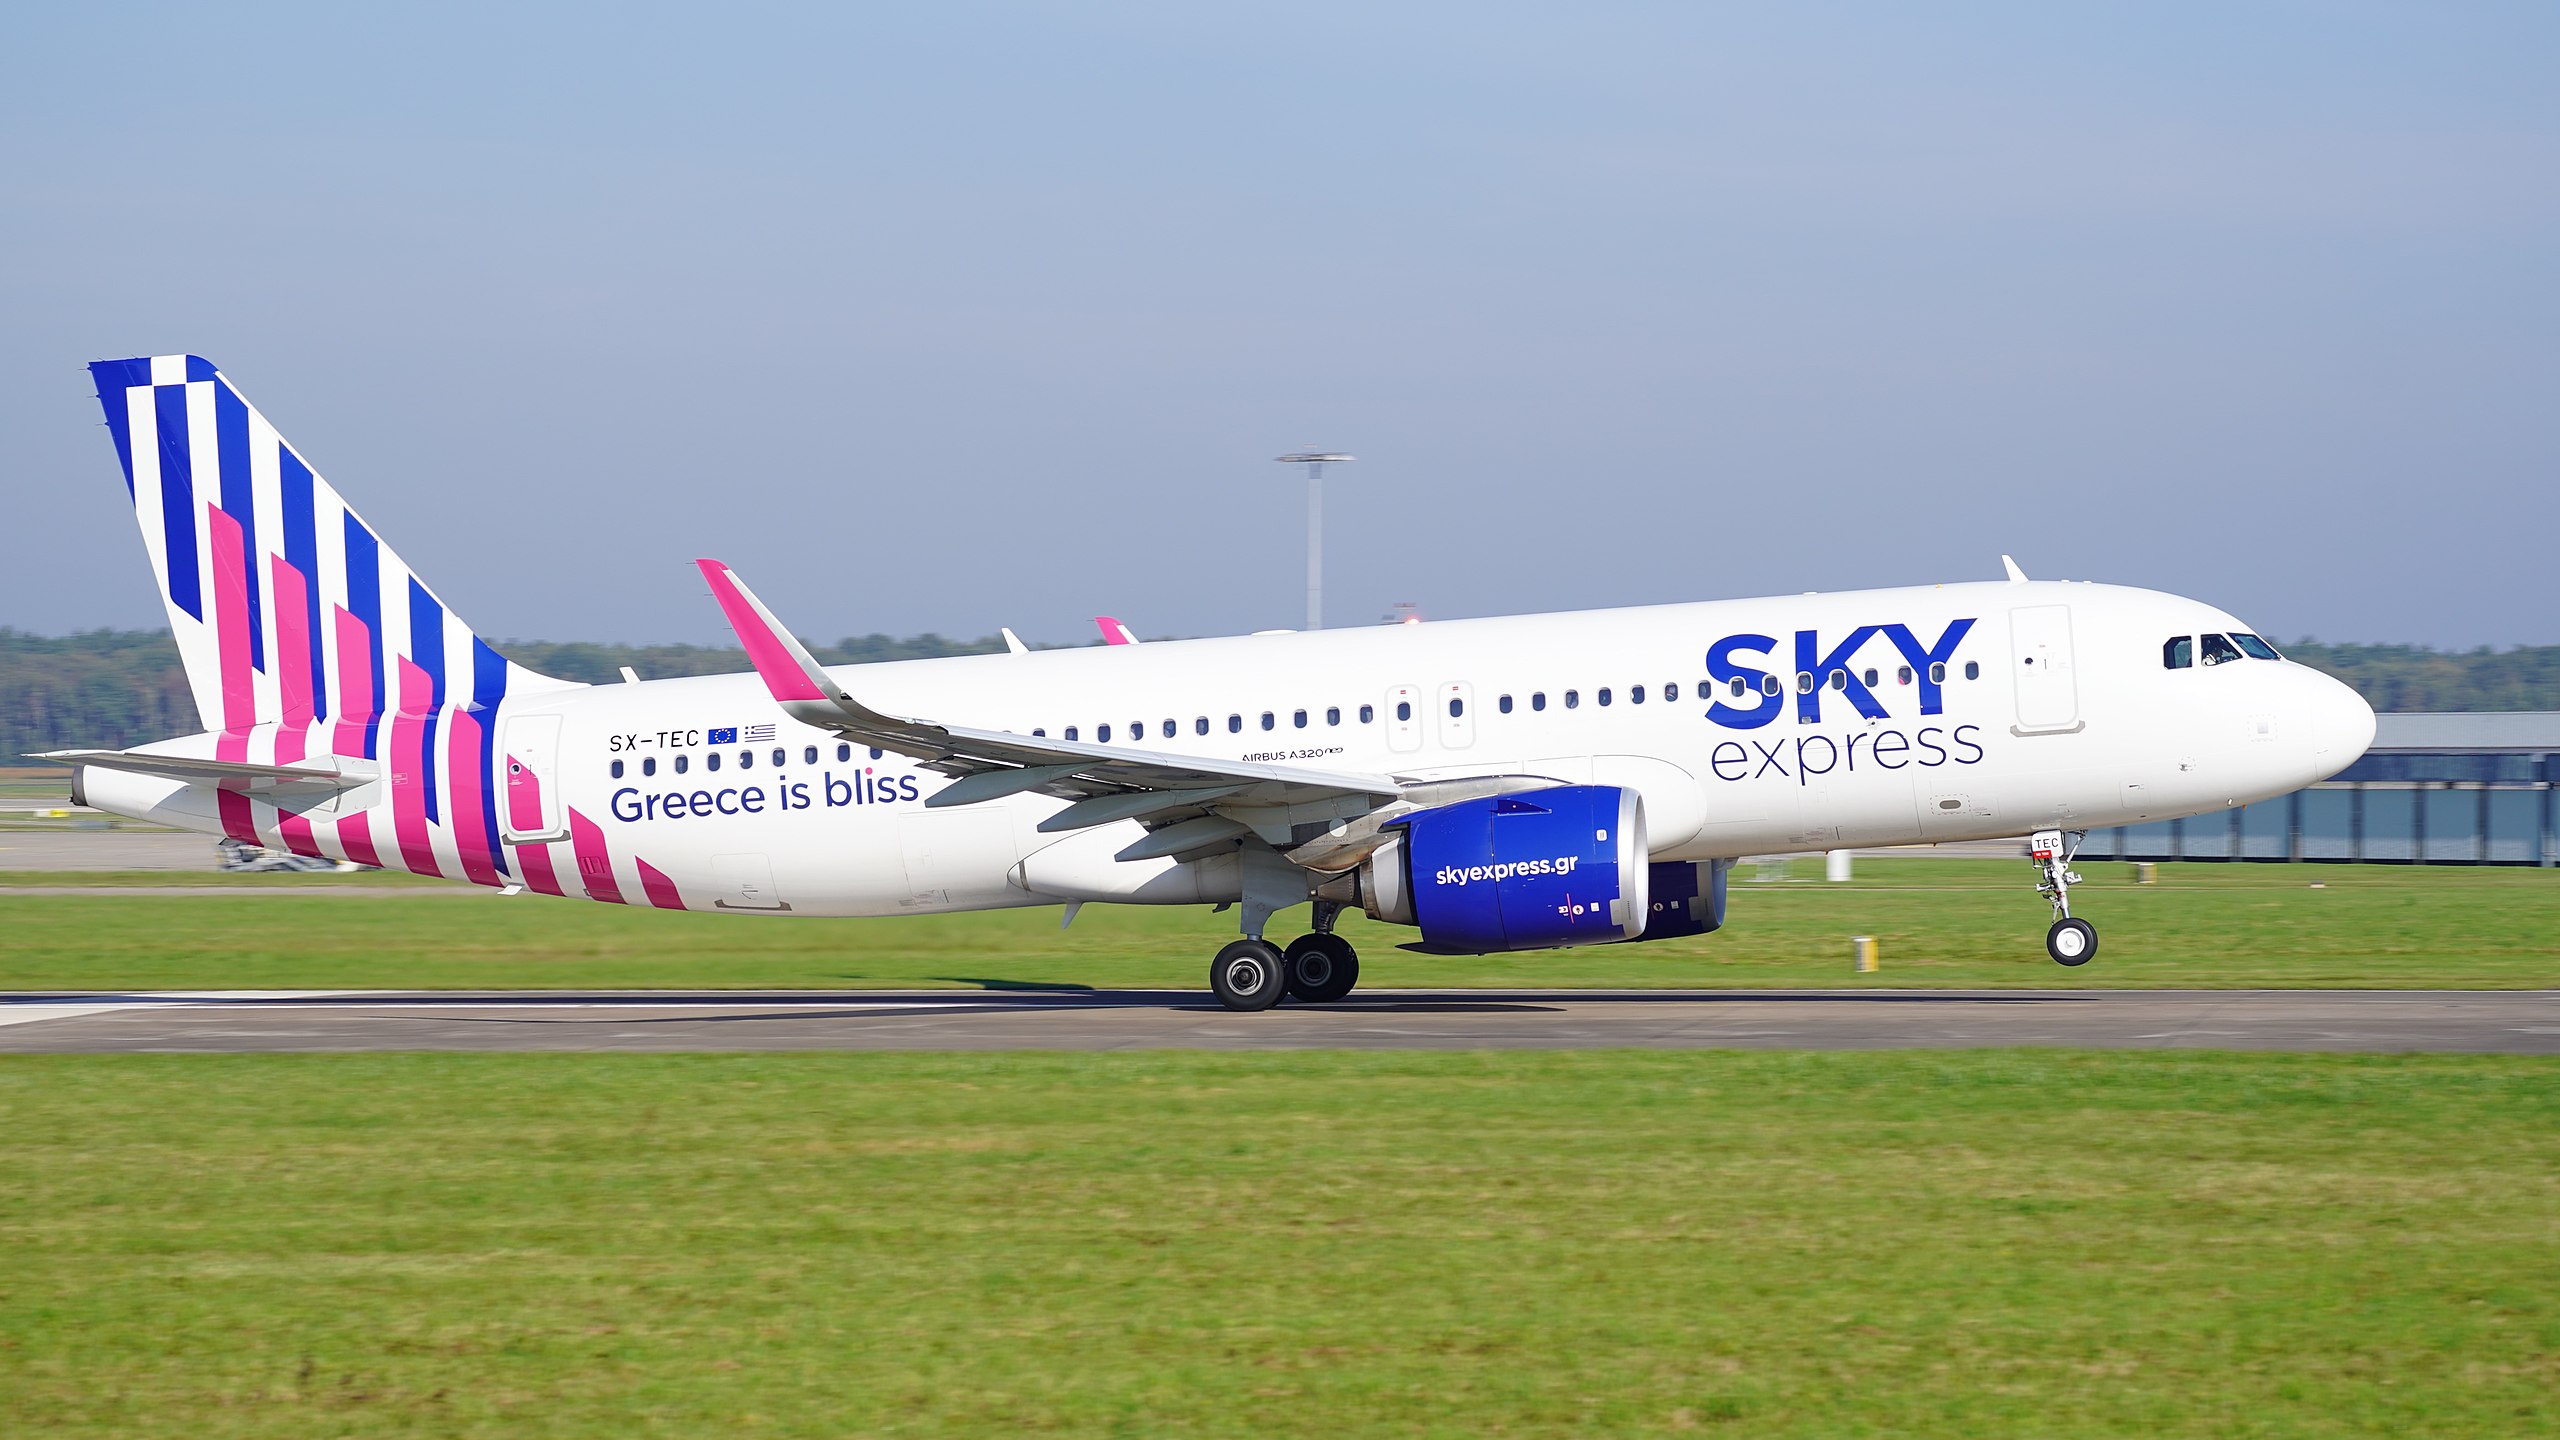 Hannover_Airport_SKY_express_Airbus_A320-251N_SX-TEC_DSC01795-1